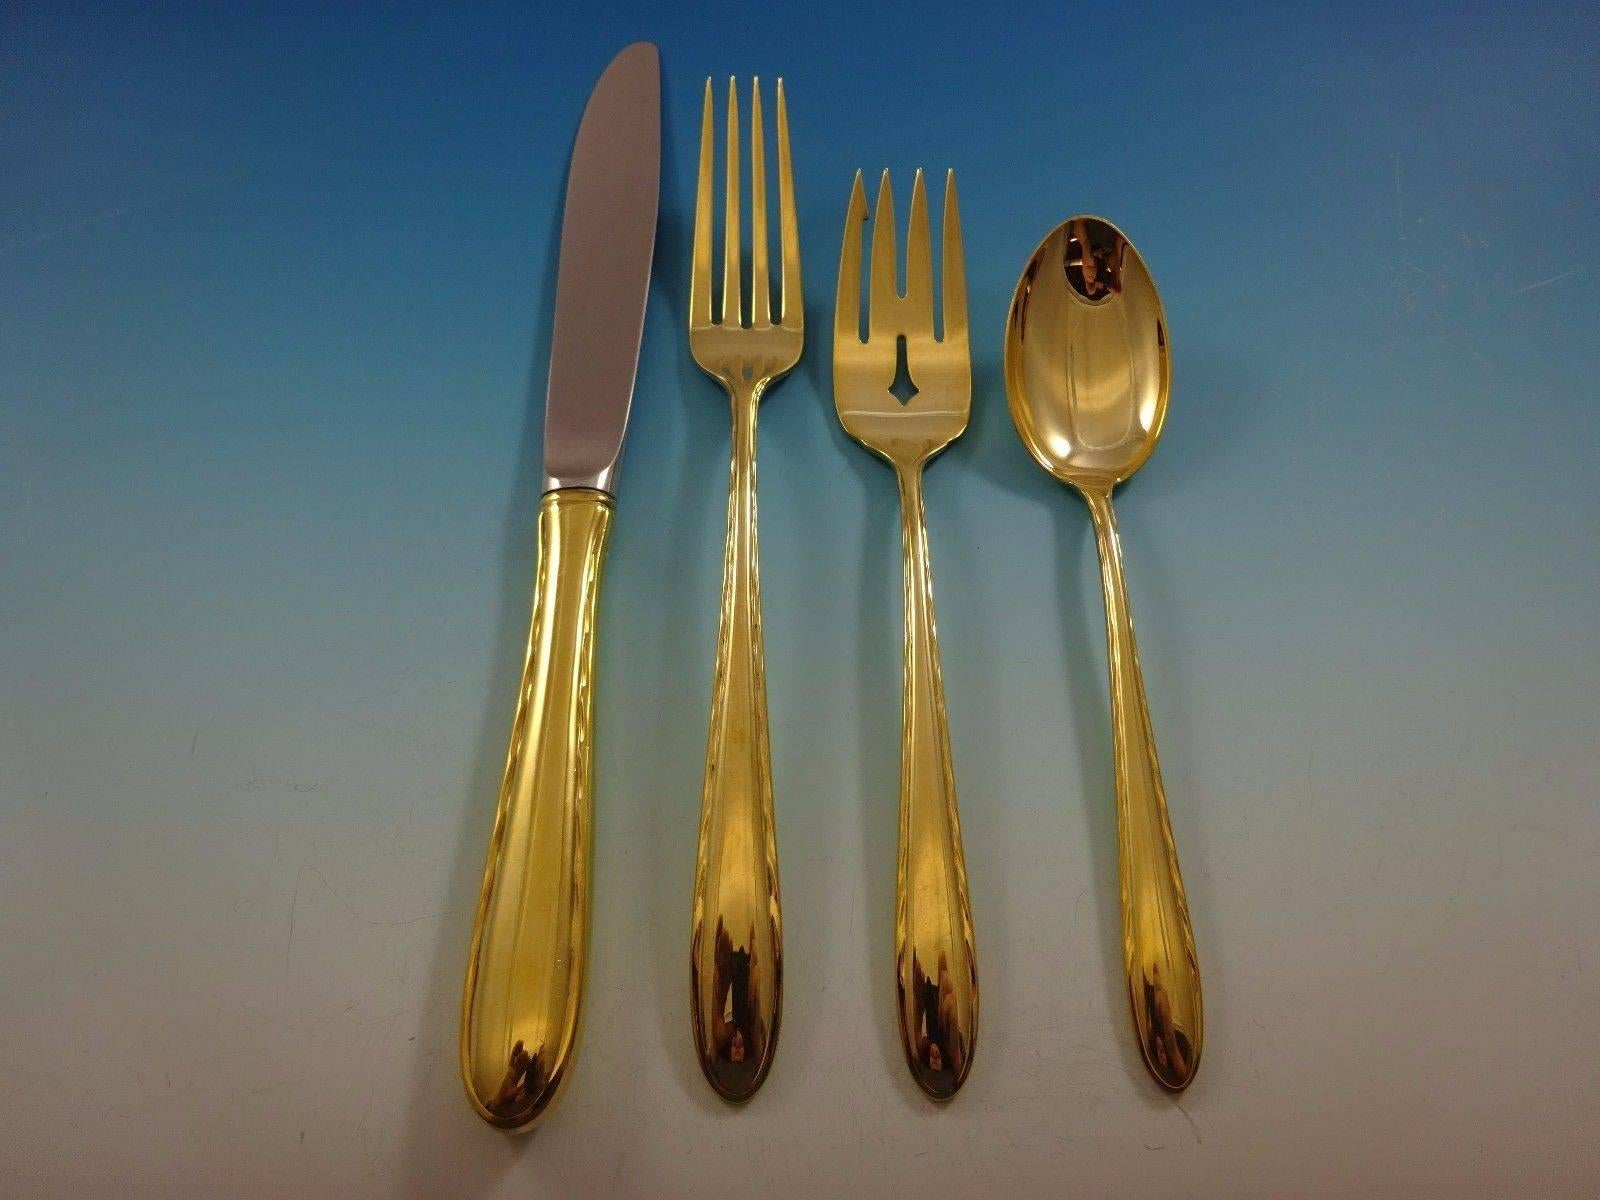 Beautiful silver flutes fold by Towle sterling silver flatware set, 32 pieces. This set is vermeil (completely gold-washed) and includes: 

Eight knives, 8 7/8